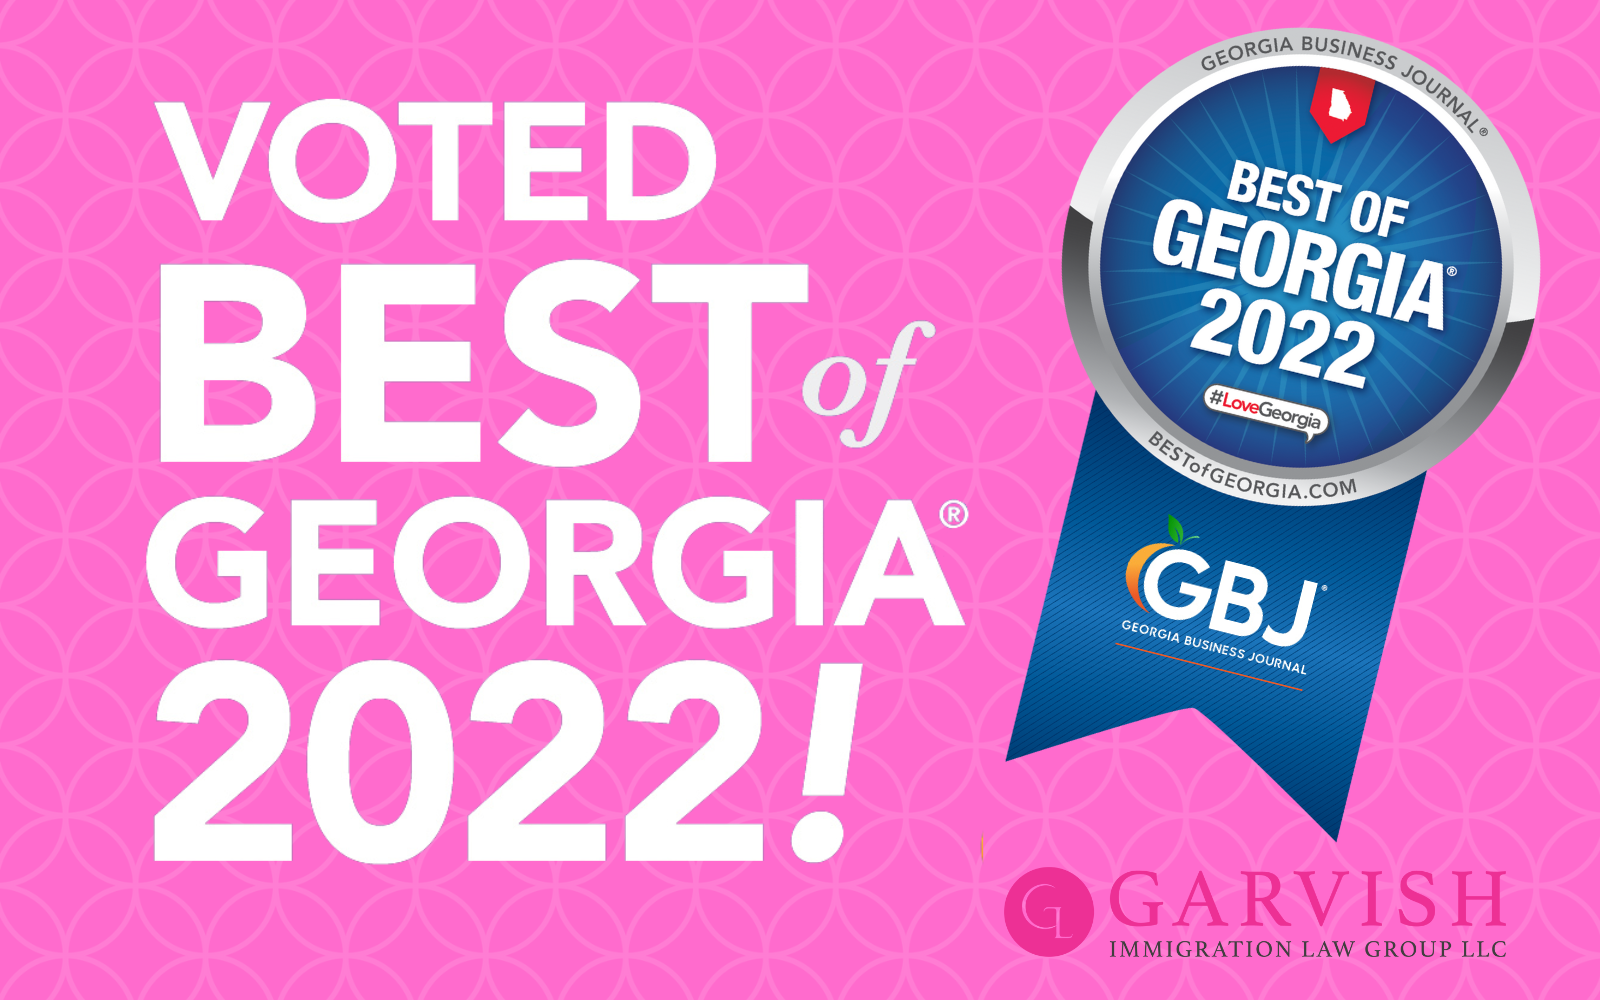 Best of Georgia 2022 for Immigration Law Firm in Atlanta